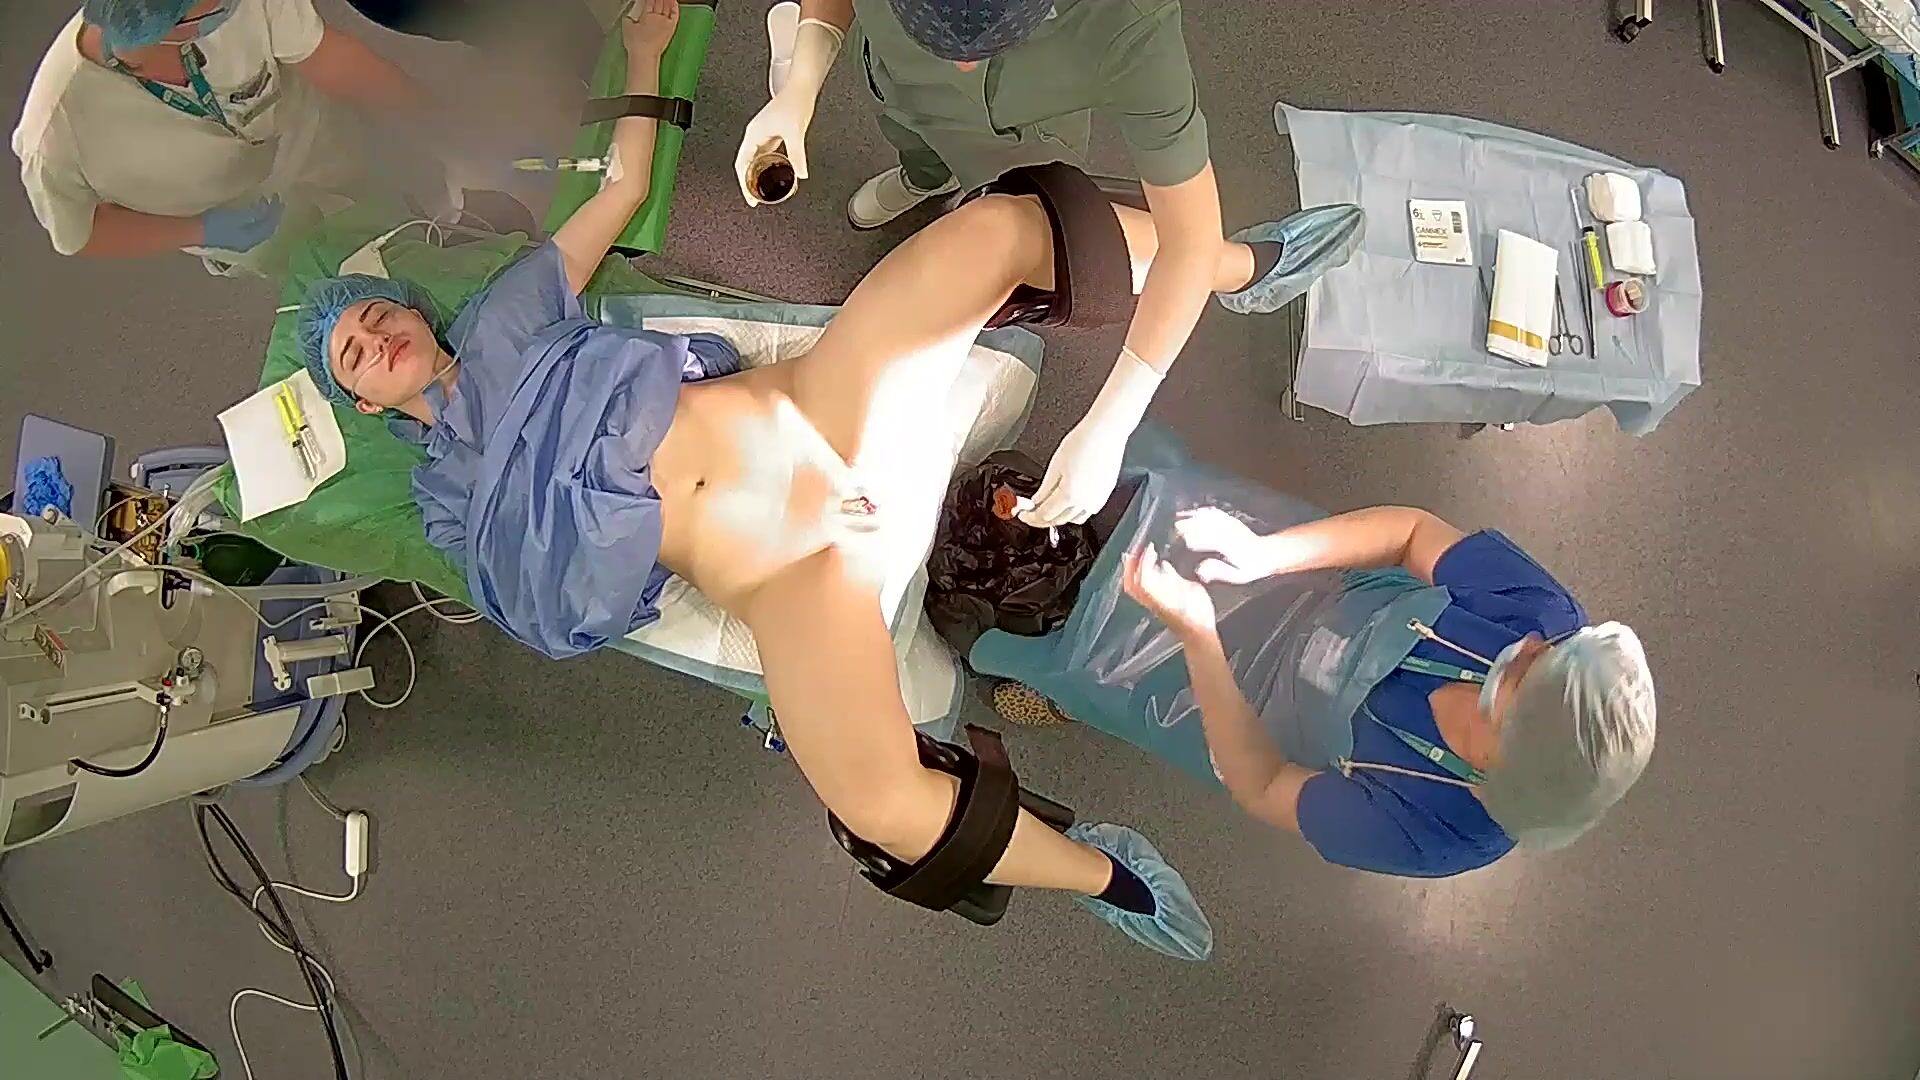 Operation Porn - Gynecology operation 12 - Metadoll Cool Porn Leaks